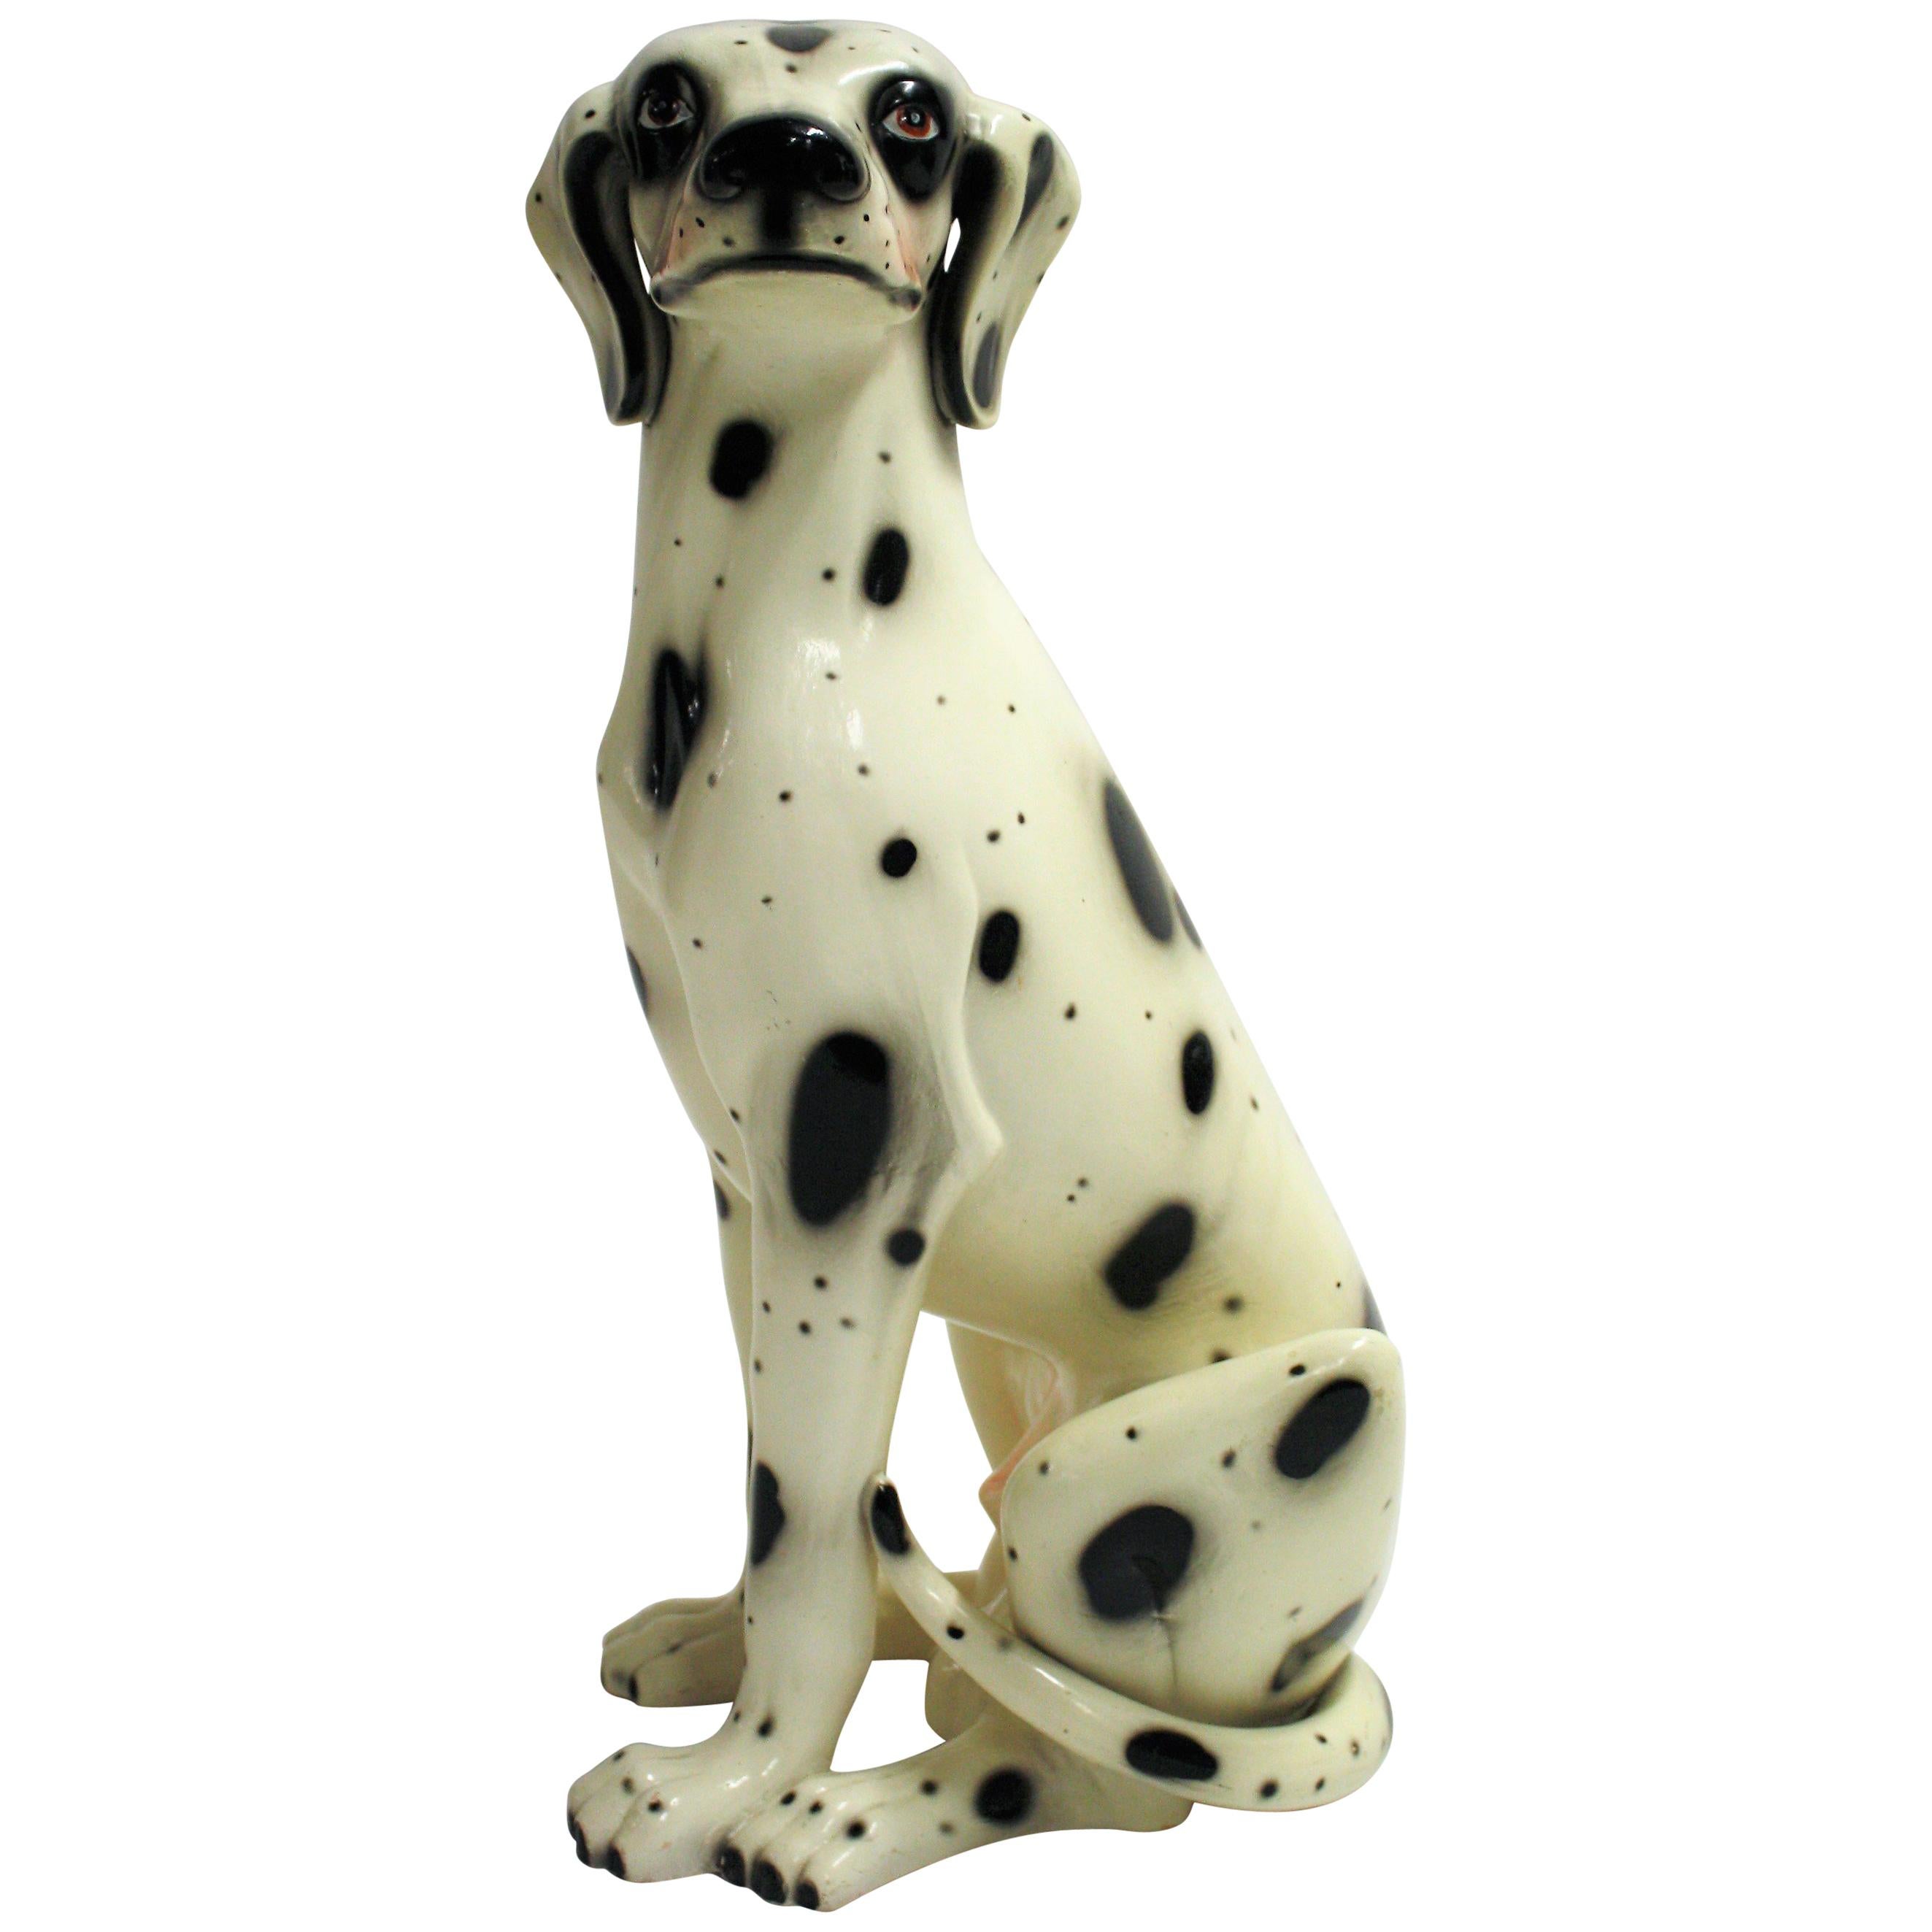 Large hand painted ceramic sculpture of a dalmatian dog made from terracotta with a matching pupy sized one.

Marked 'made in italy' at the bottom.

Very good condition, no chips or damages.

1960s - Italy

Dimensions large dog:
Height: